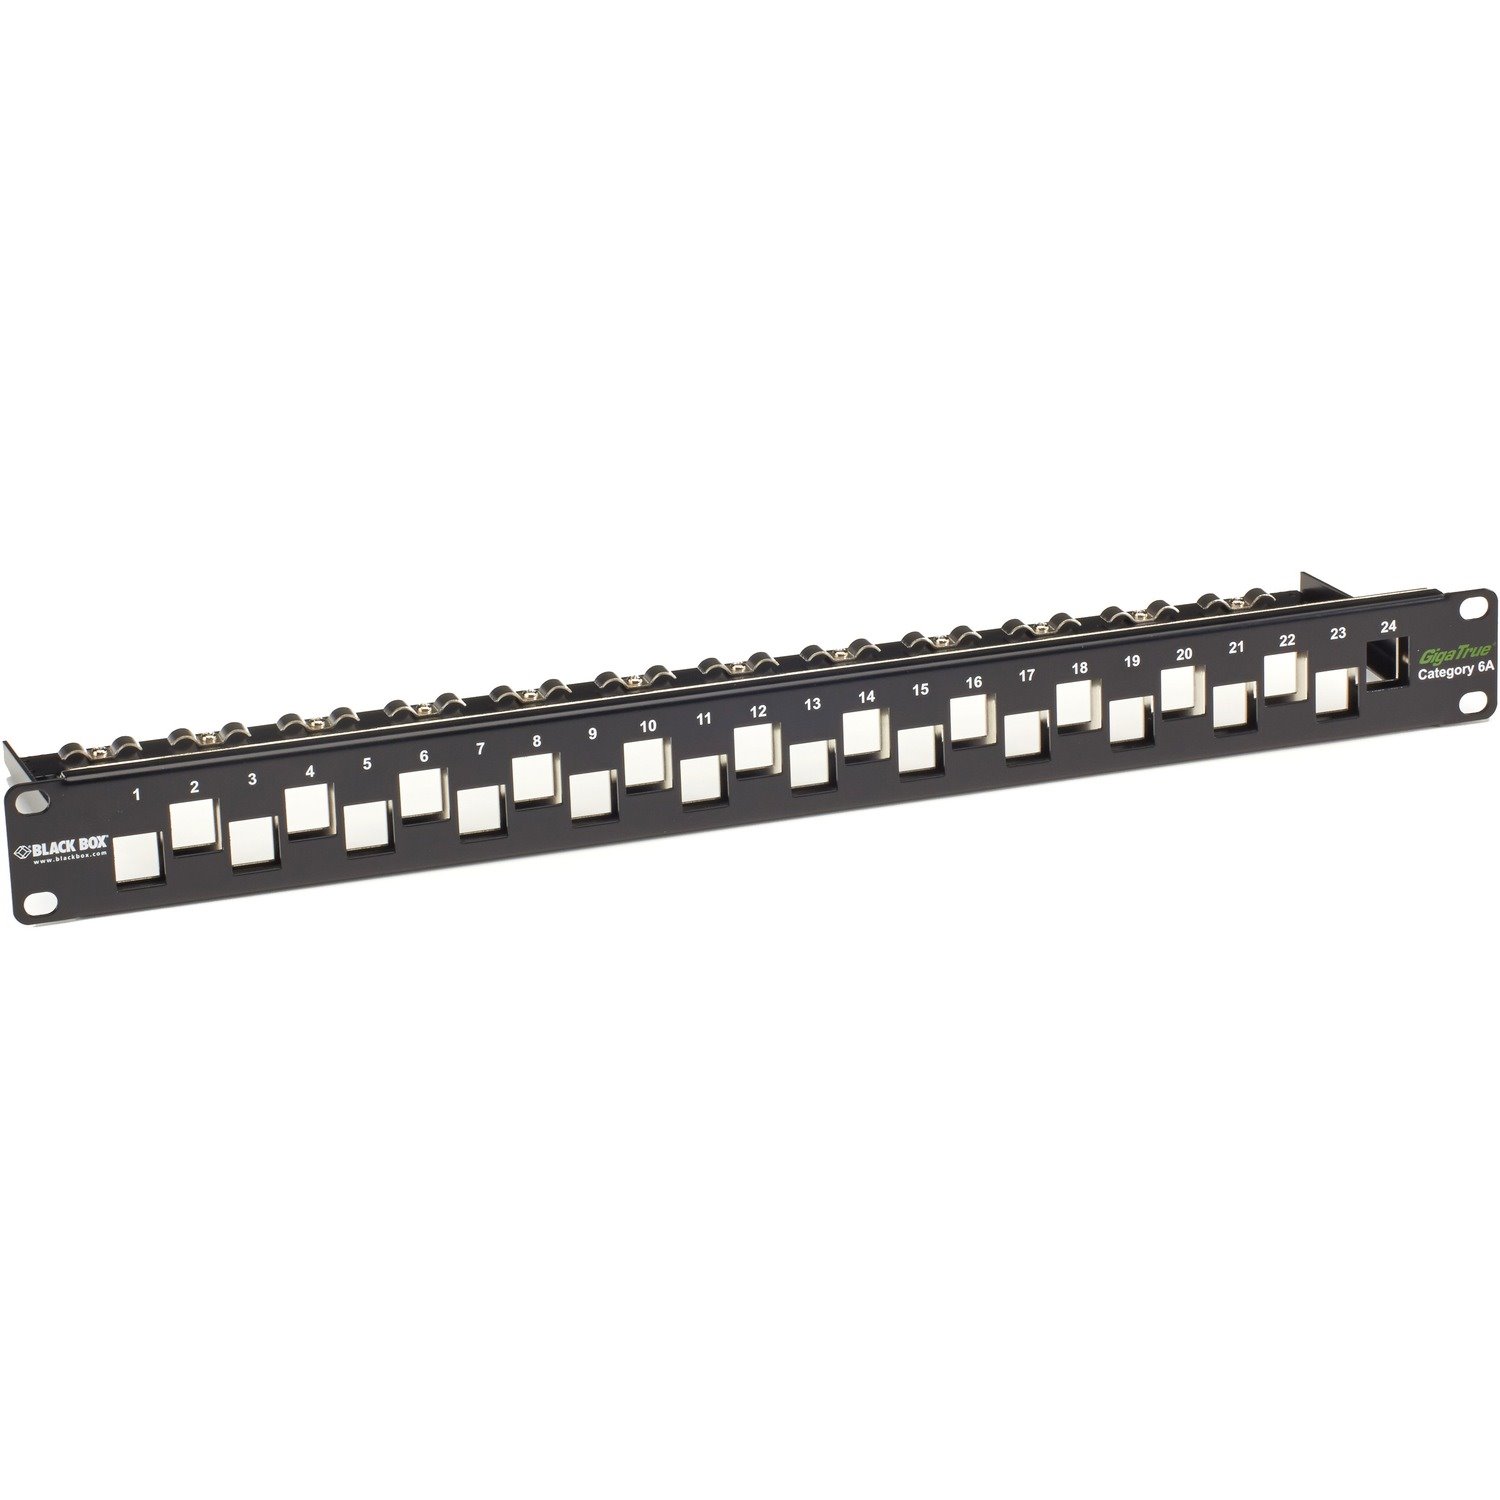 Black Box CAT6A Staggered Multimedia Patch Panel - 1U, Blank, 24-Port